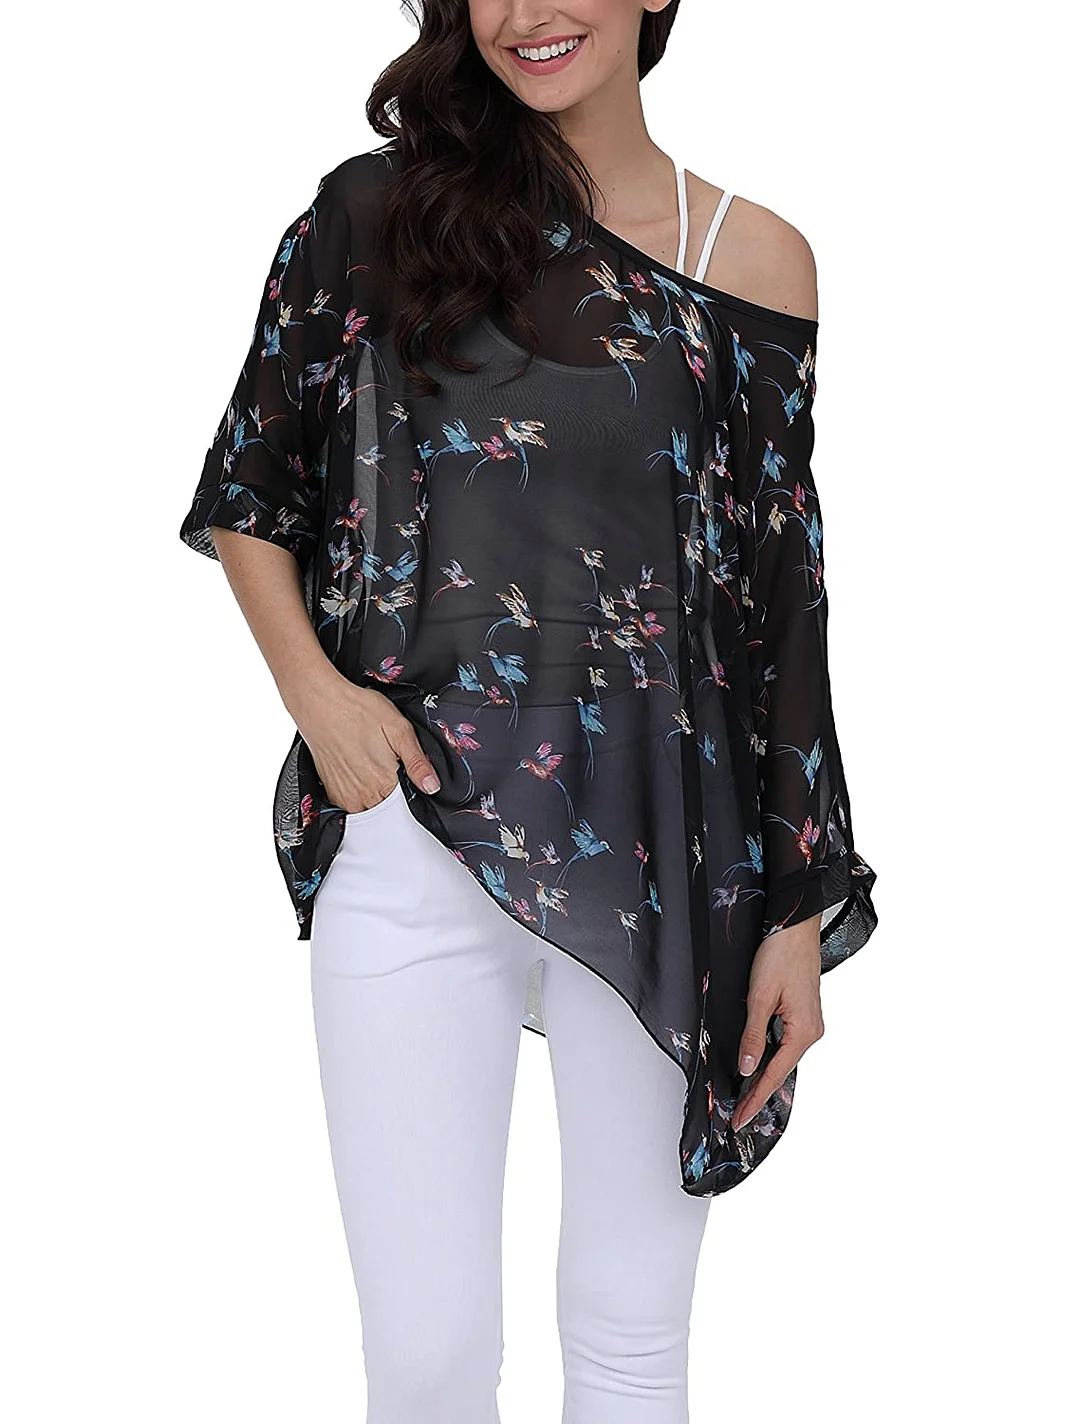 Top Chiffon Poncho Casual Loose Blouse Women Summer Floral Printed Shirt Batwing Sleeve